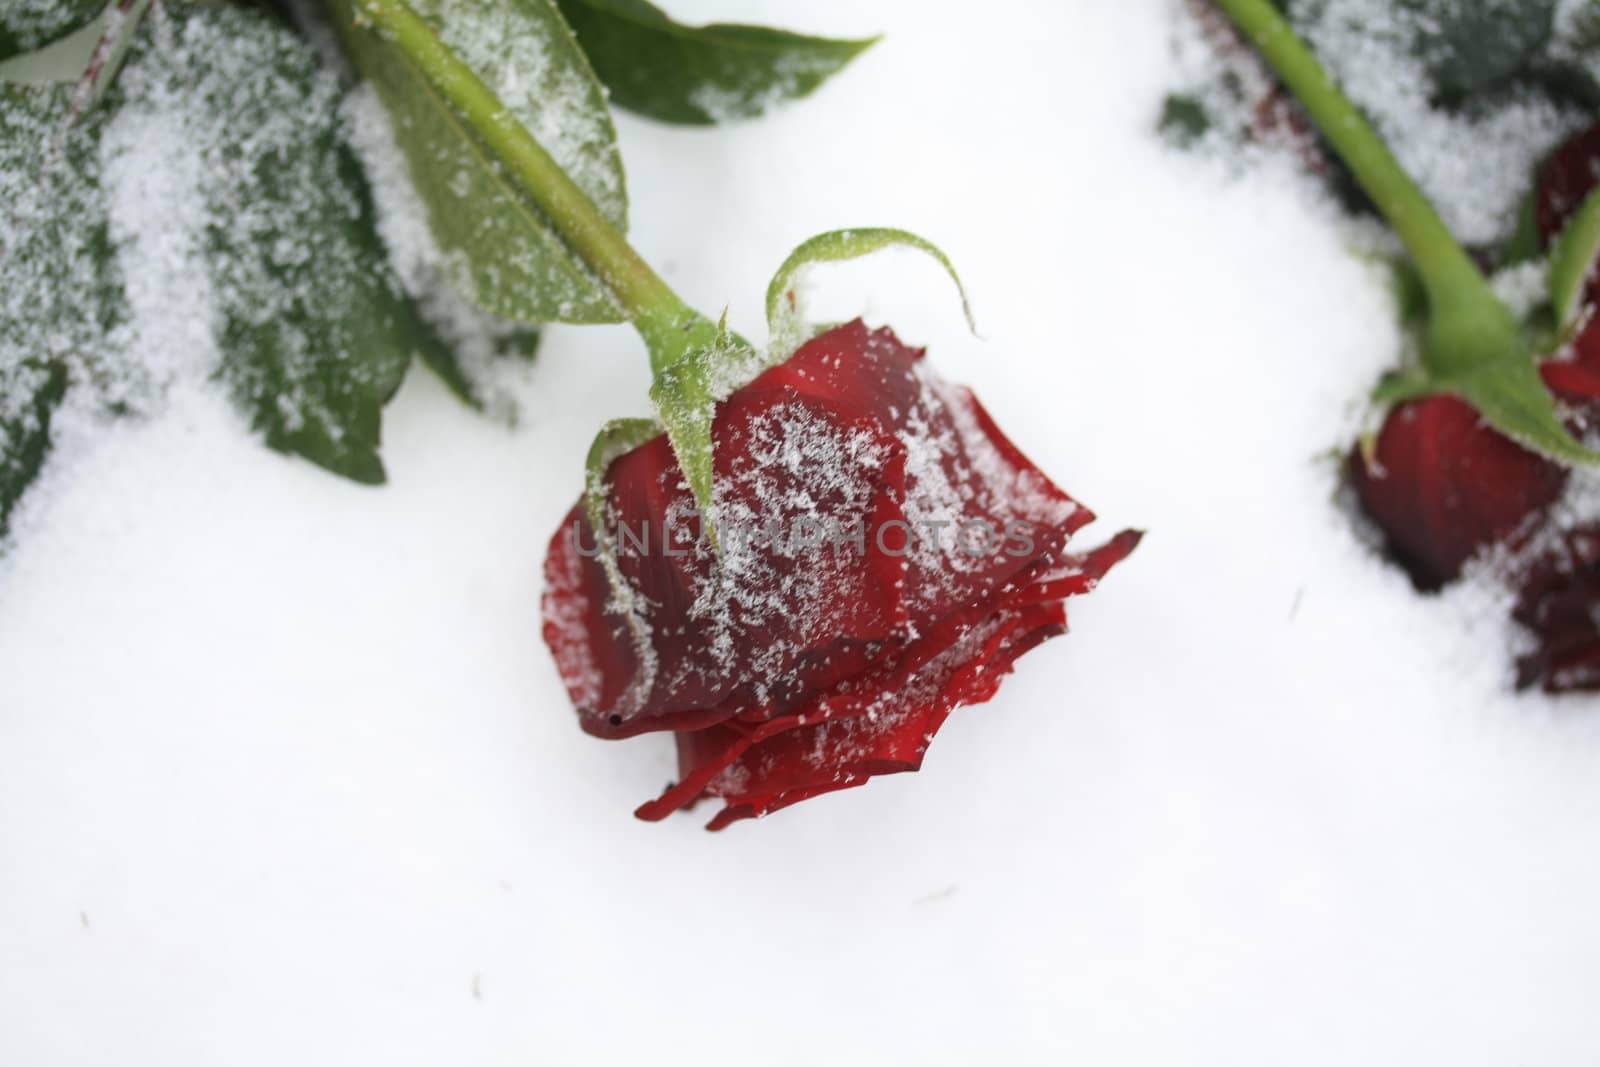 solitaire snow rose by studioportosabbia